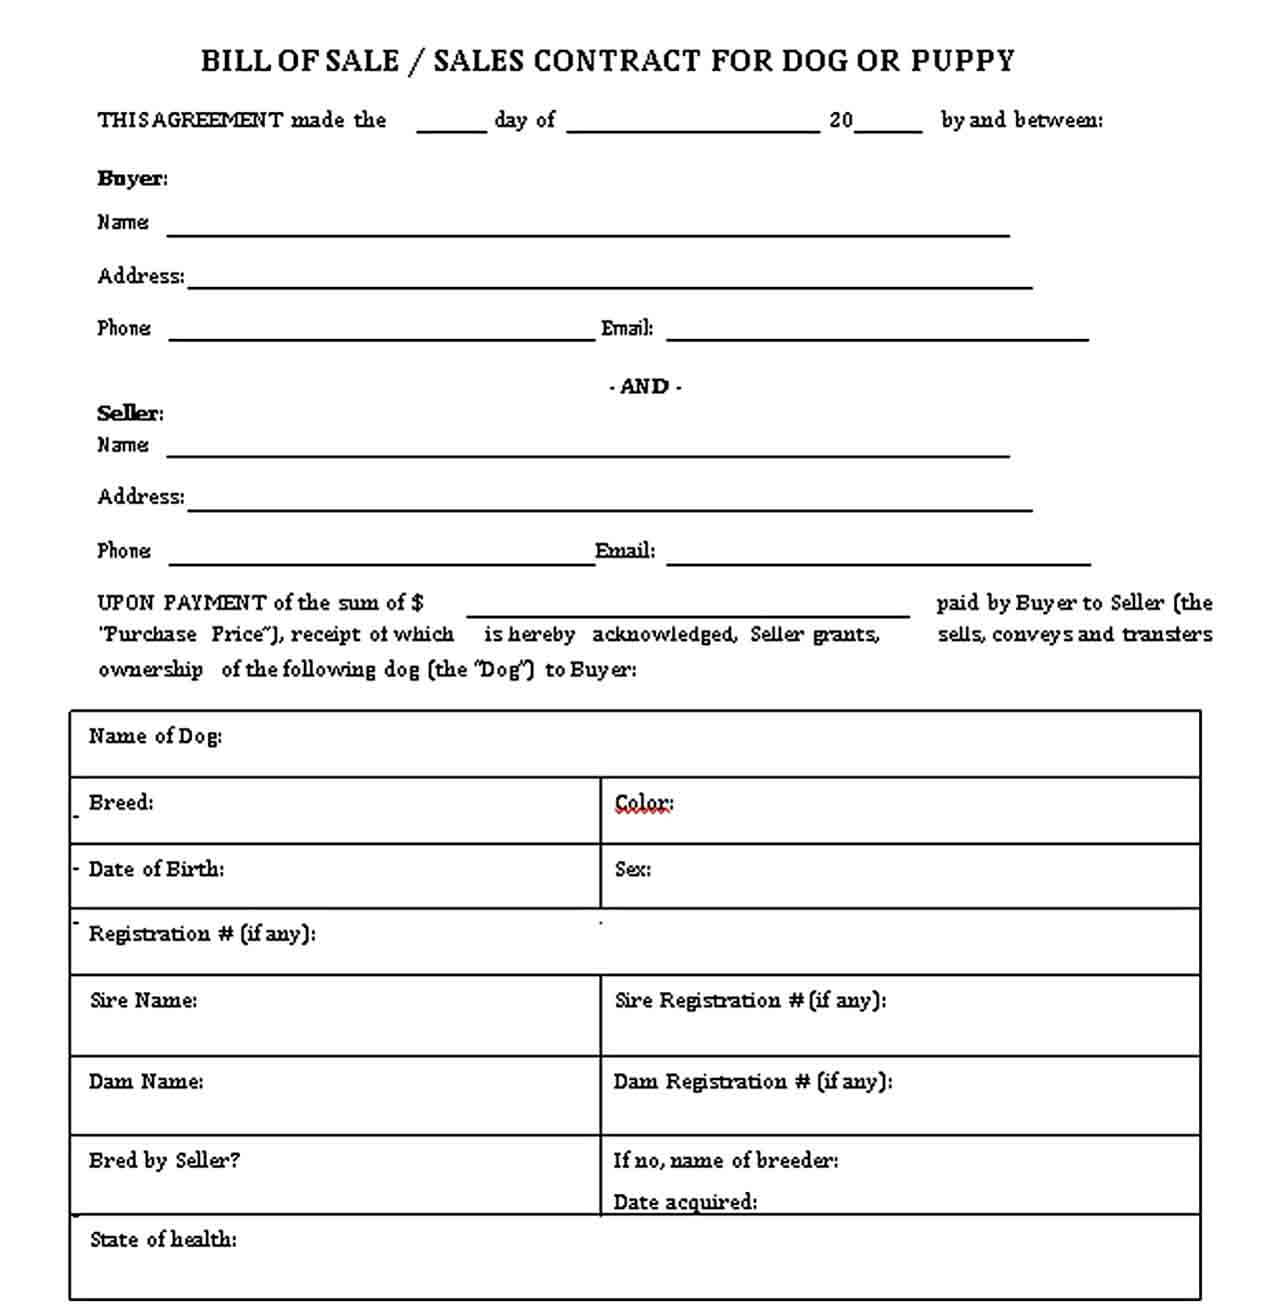 dog bill of sale template free